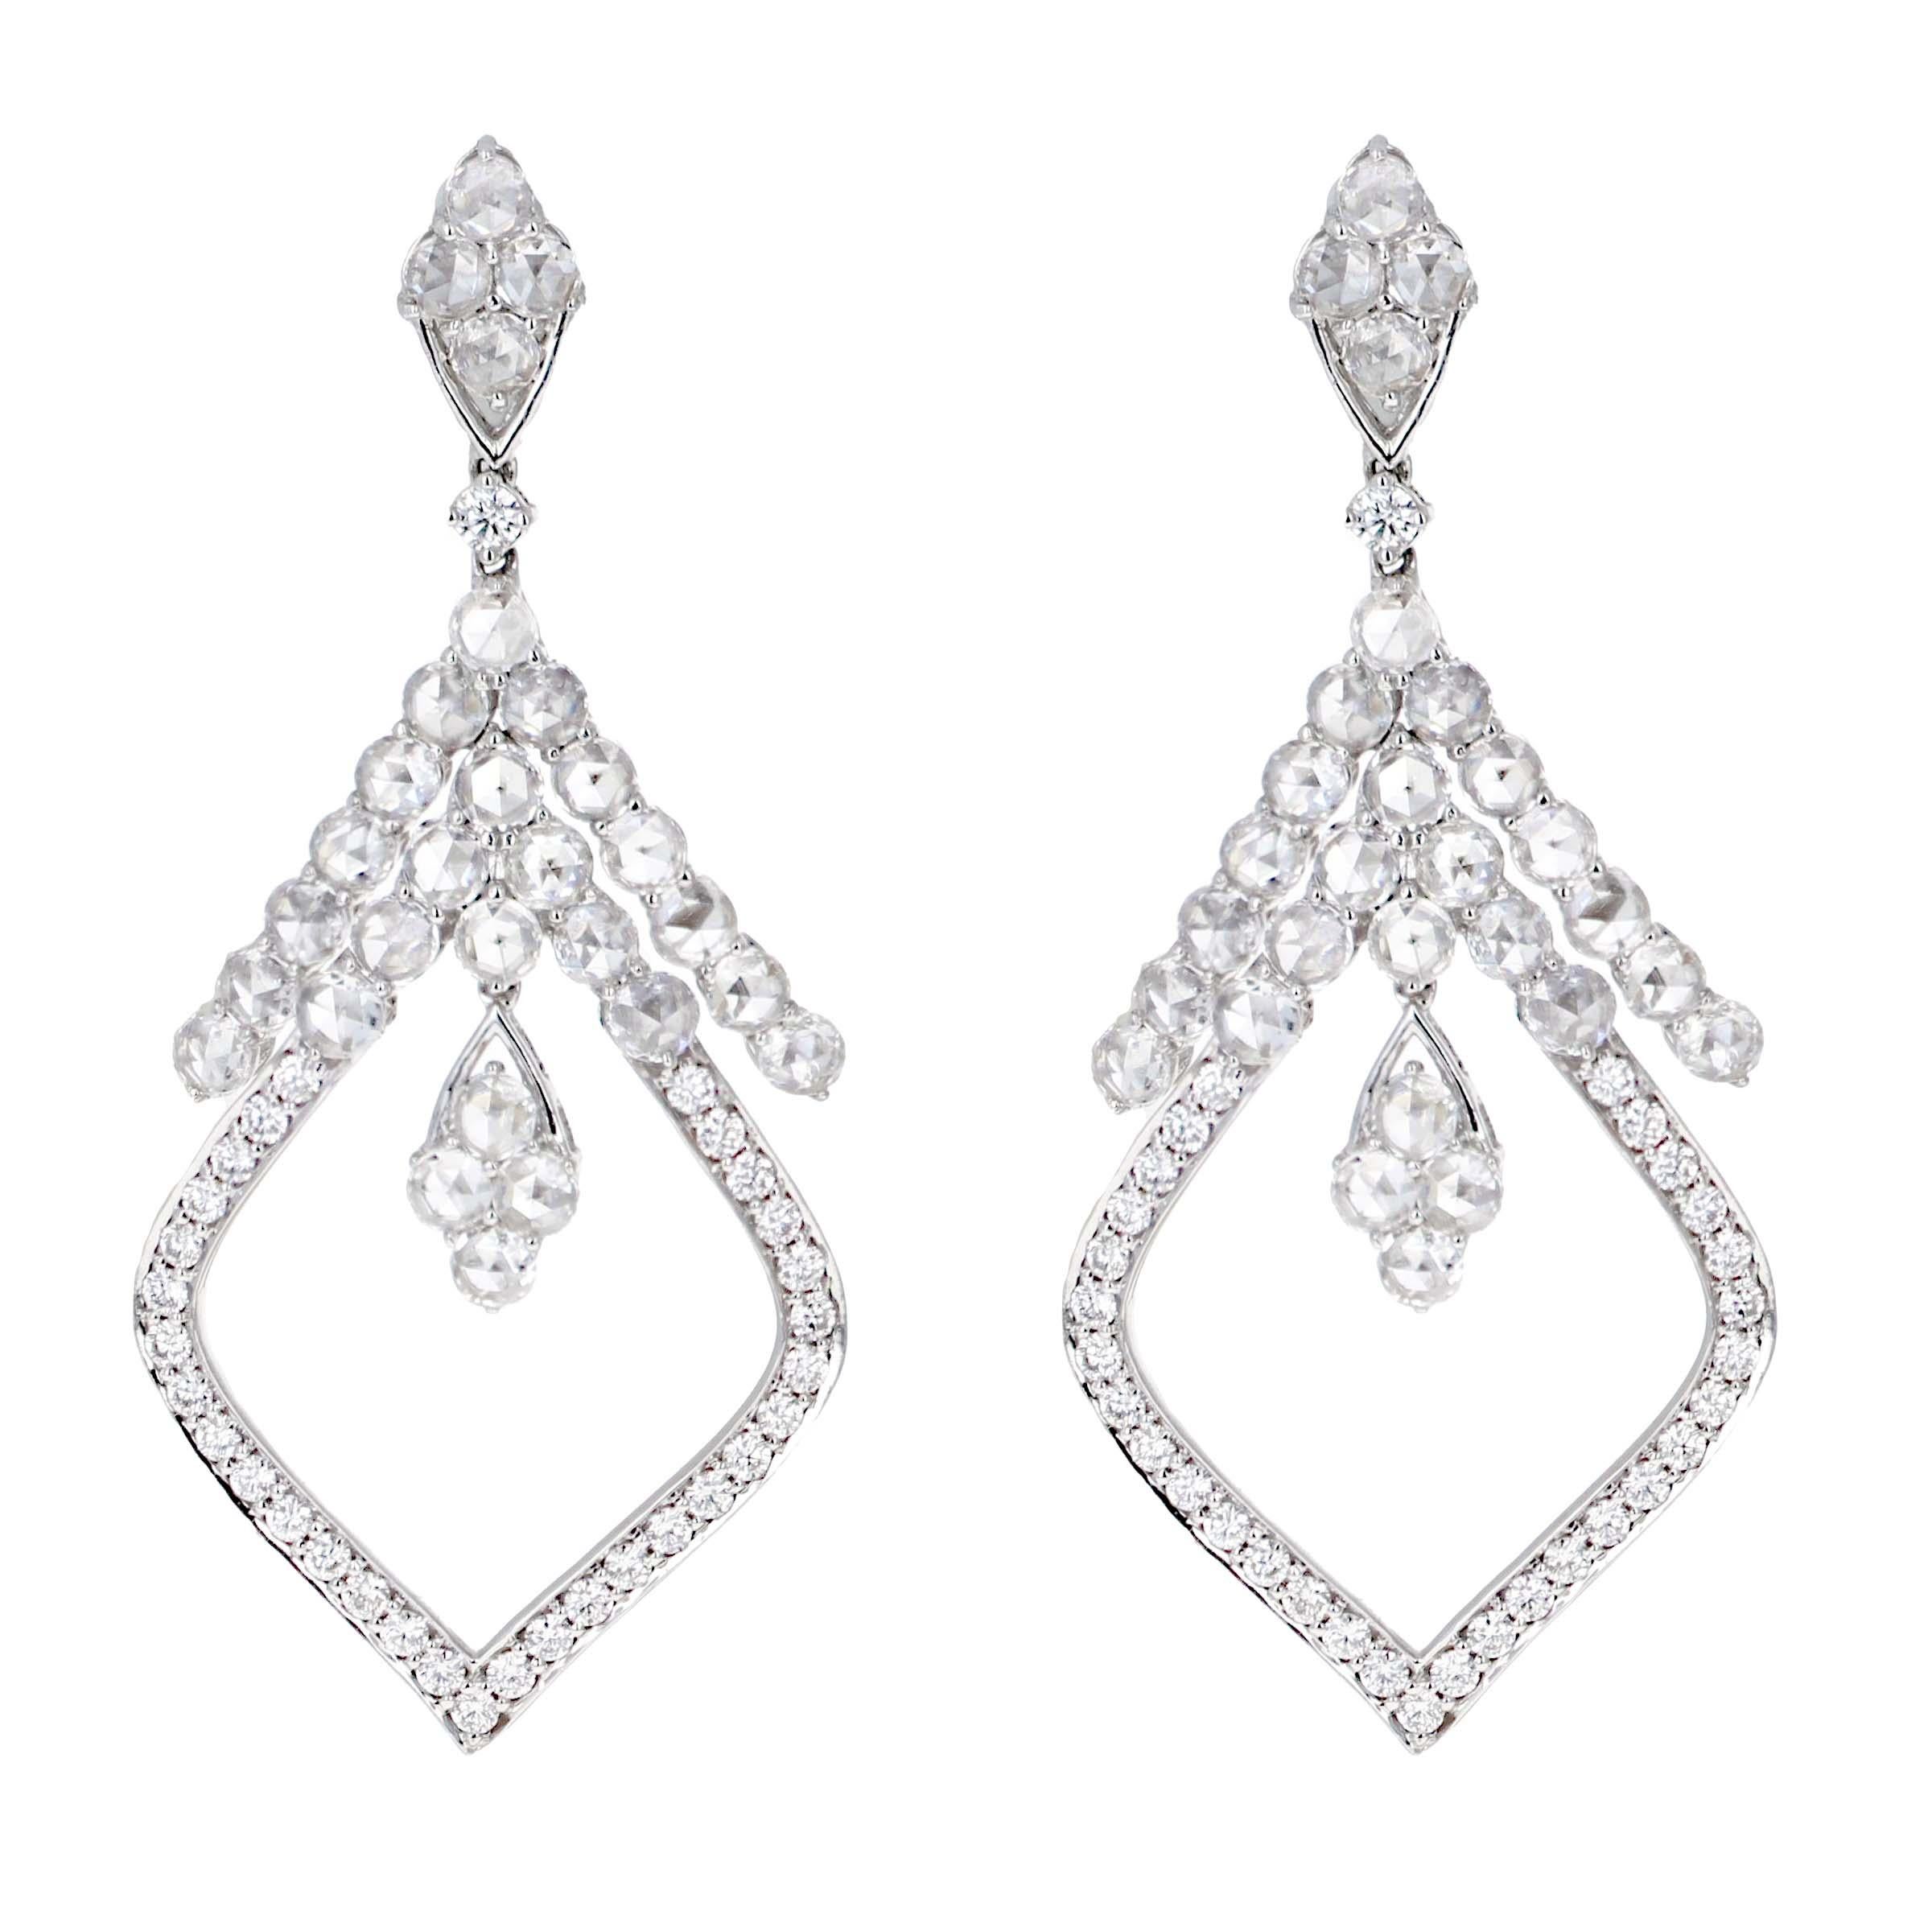 18-karat white gold chandelier rose cut diamond dangle earrings, a testament to timeless elegance and sophistication. Each earring features a cluster of four exquisite rose-cut diamonds, cascading to a display of thirteen scintillating stones,